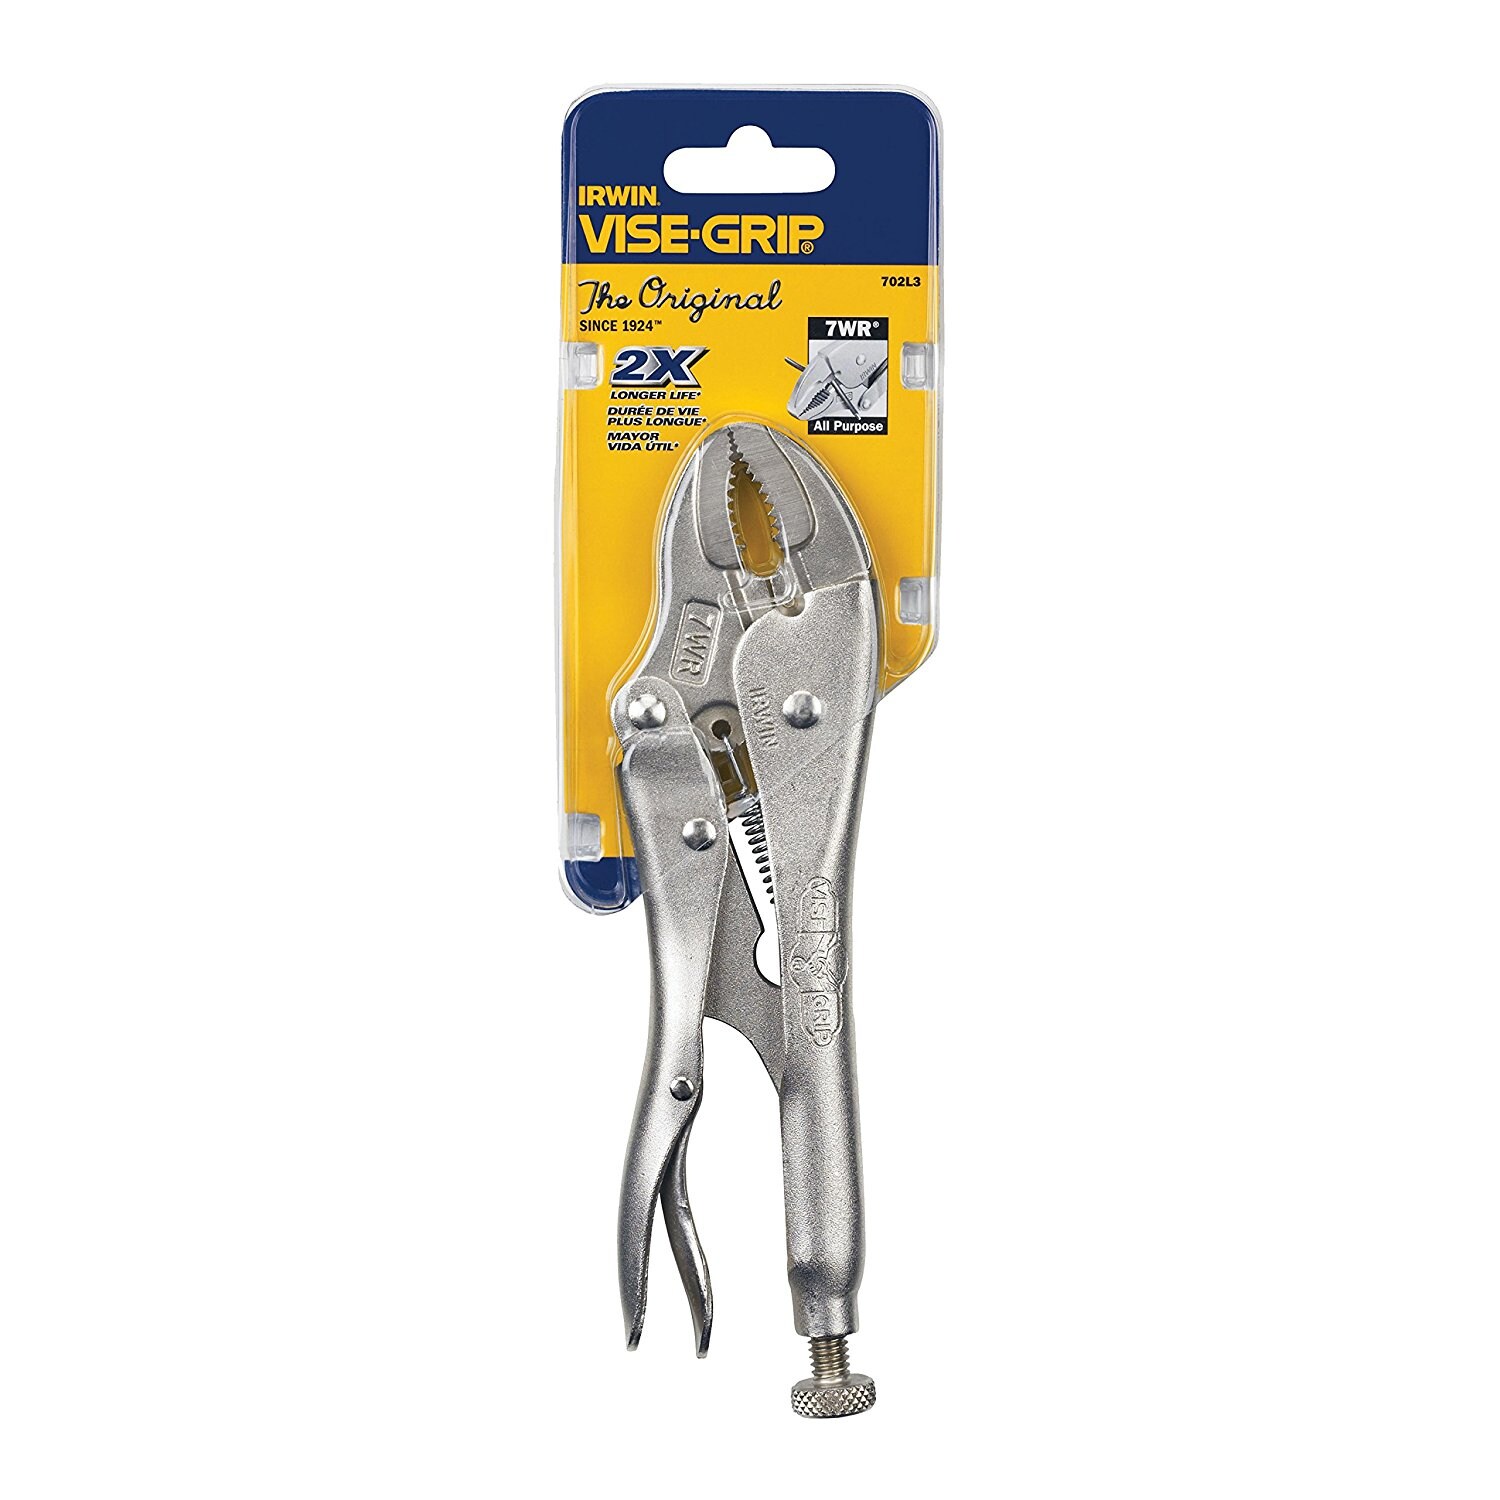 Vise-Grip Locking Wrench with Wire Cutter 